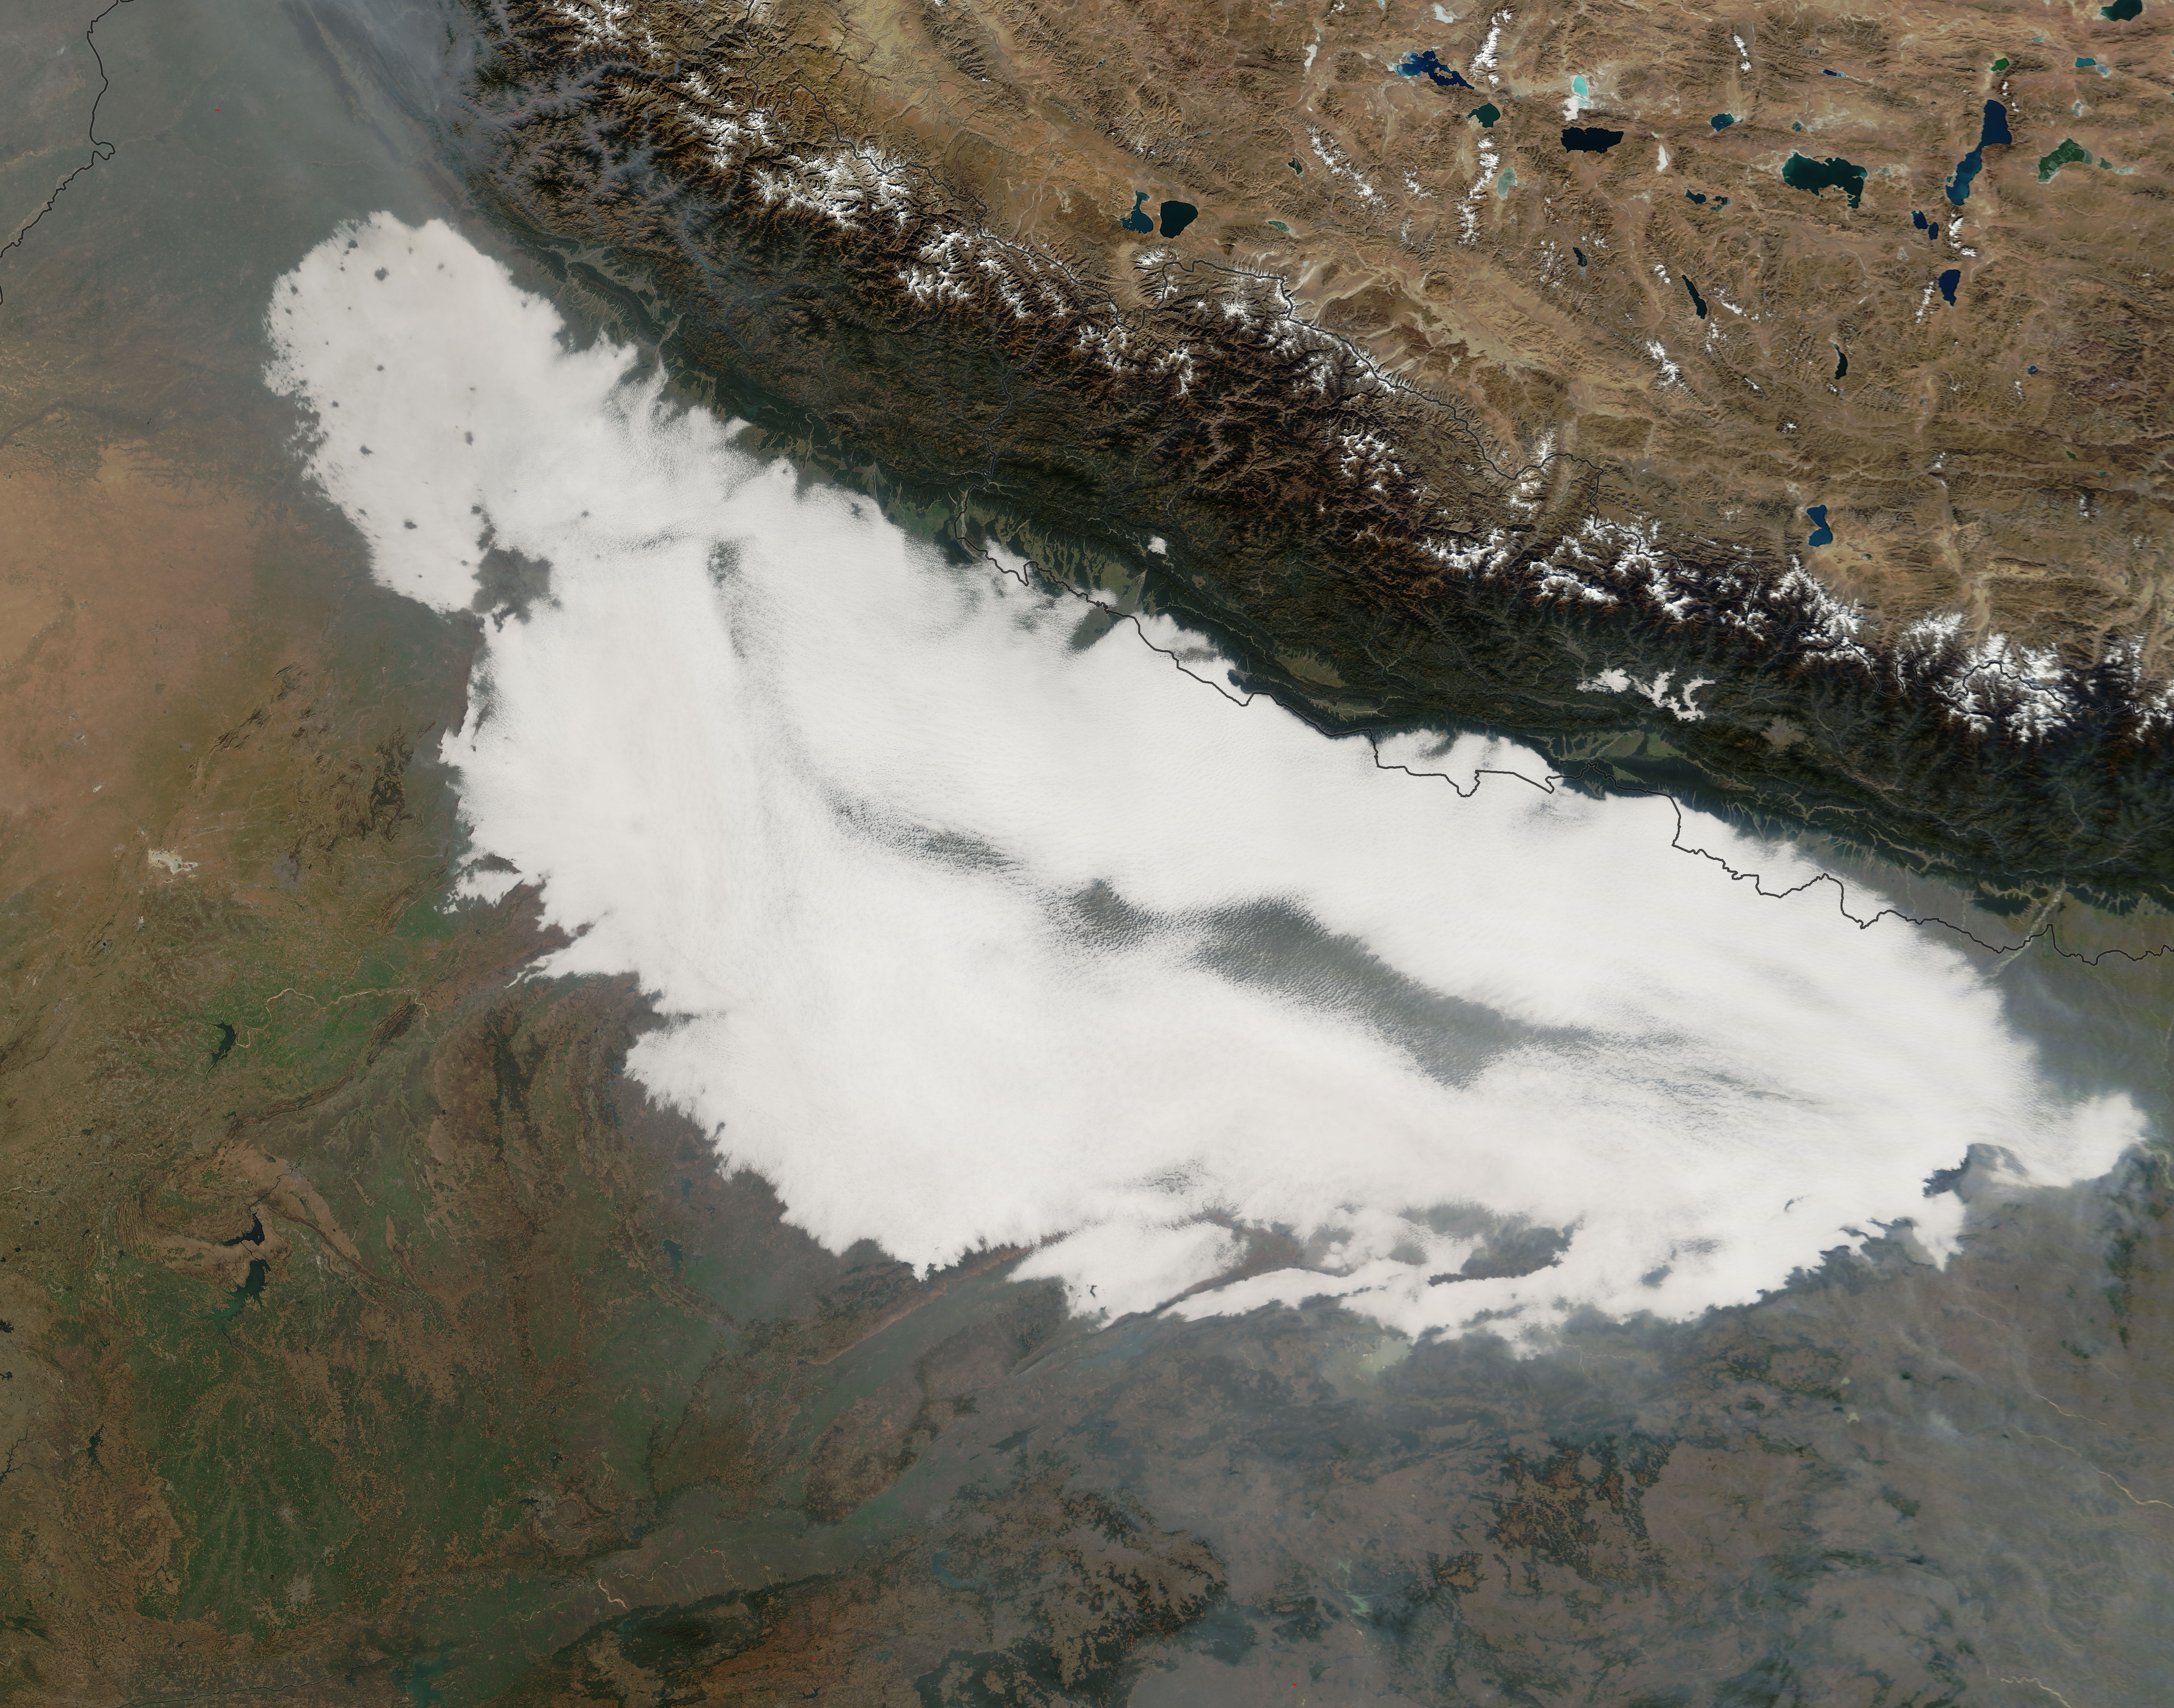 Fleeting Fog in India  - related image preview